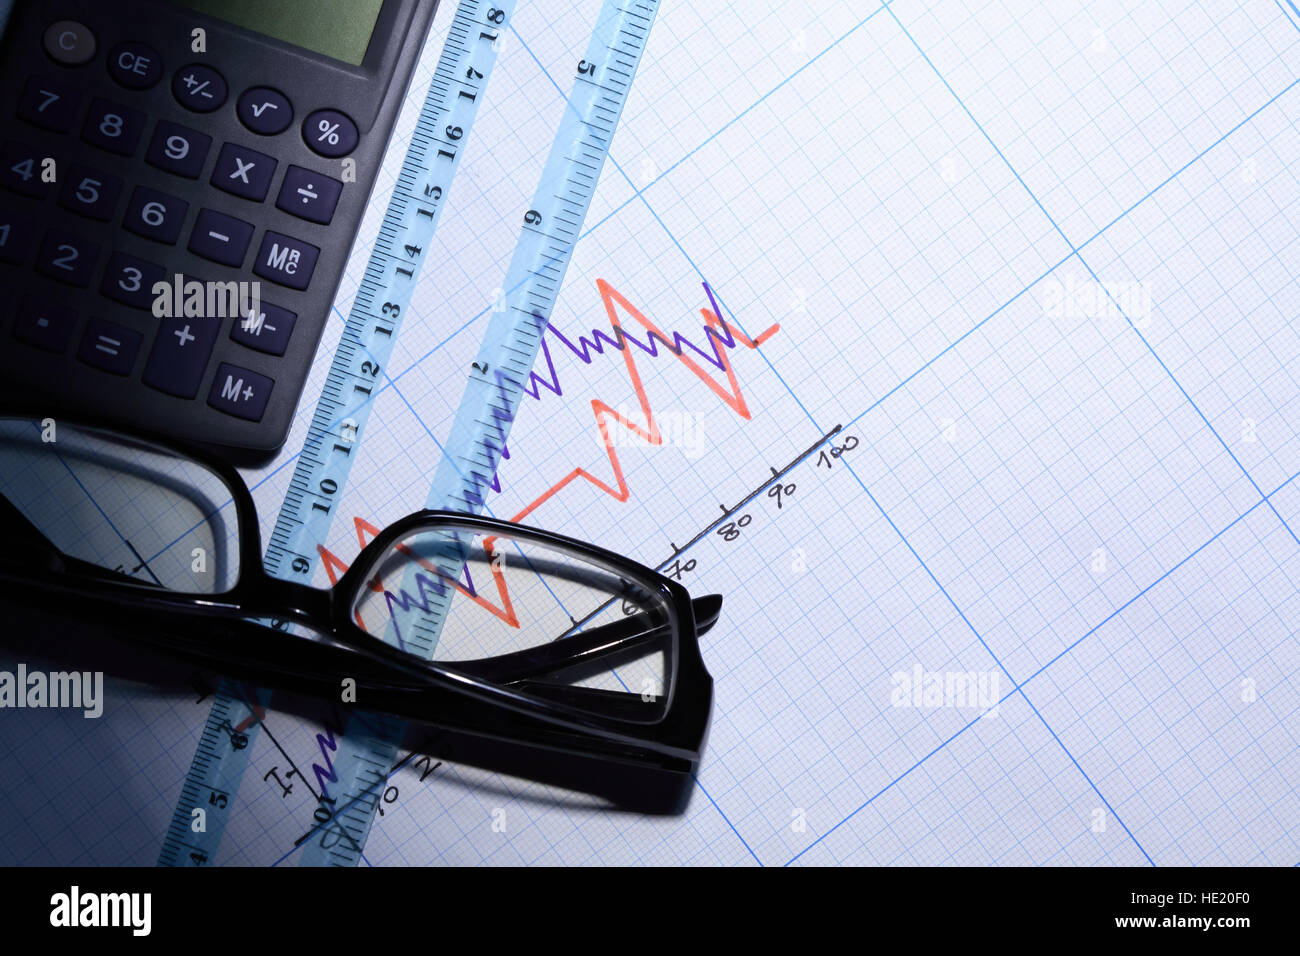 Calculator near ruler and spectacles on graph paper with diagram Stock Photo